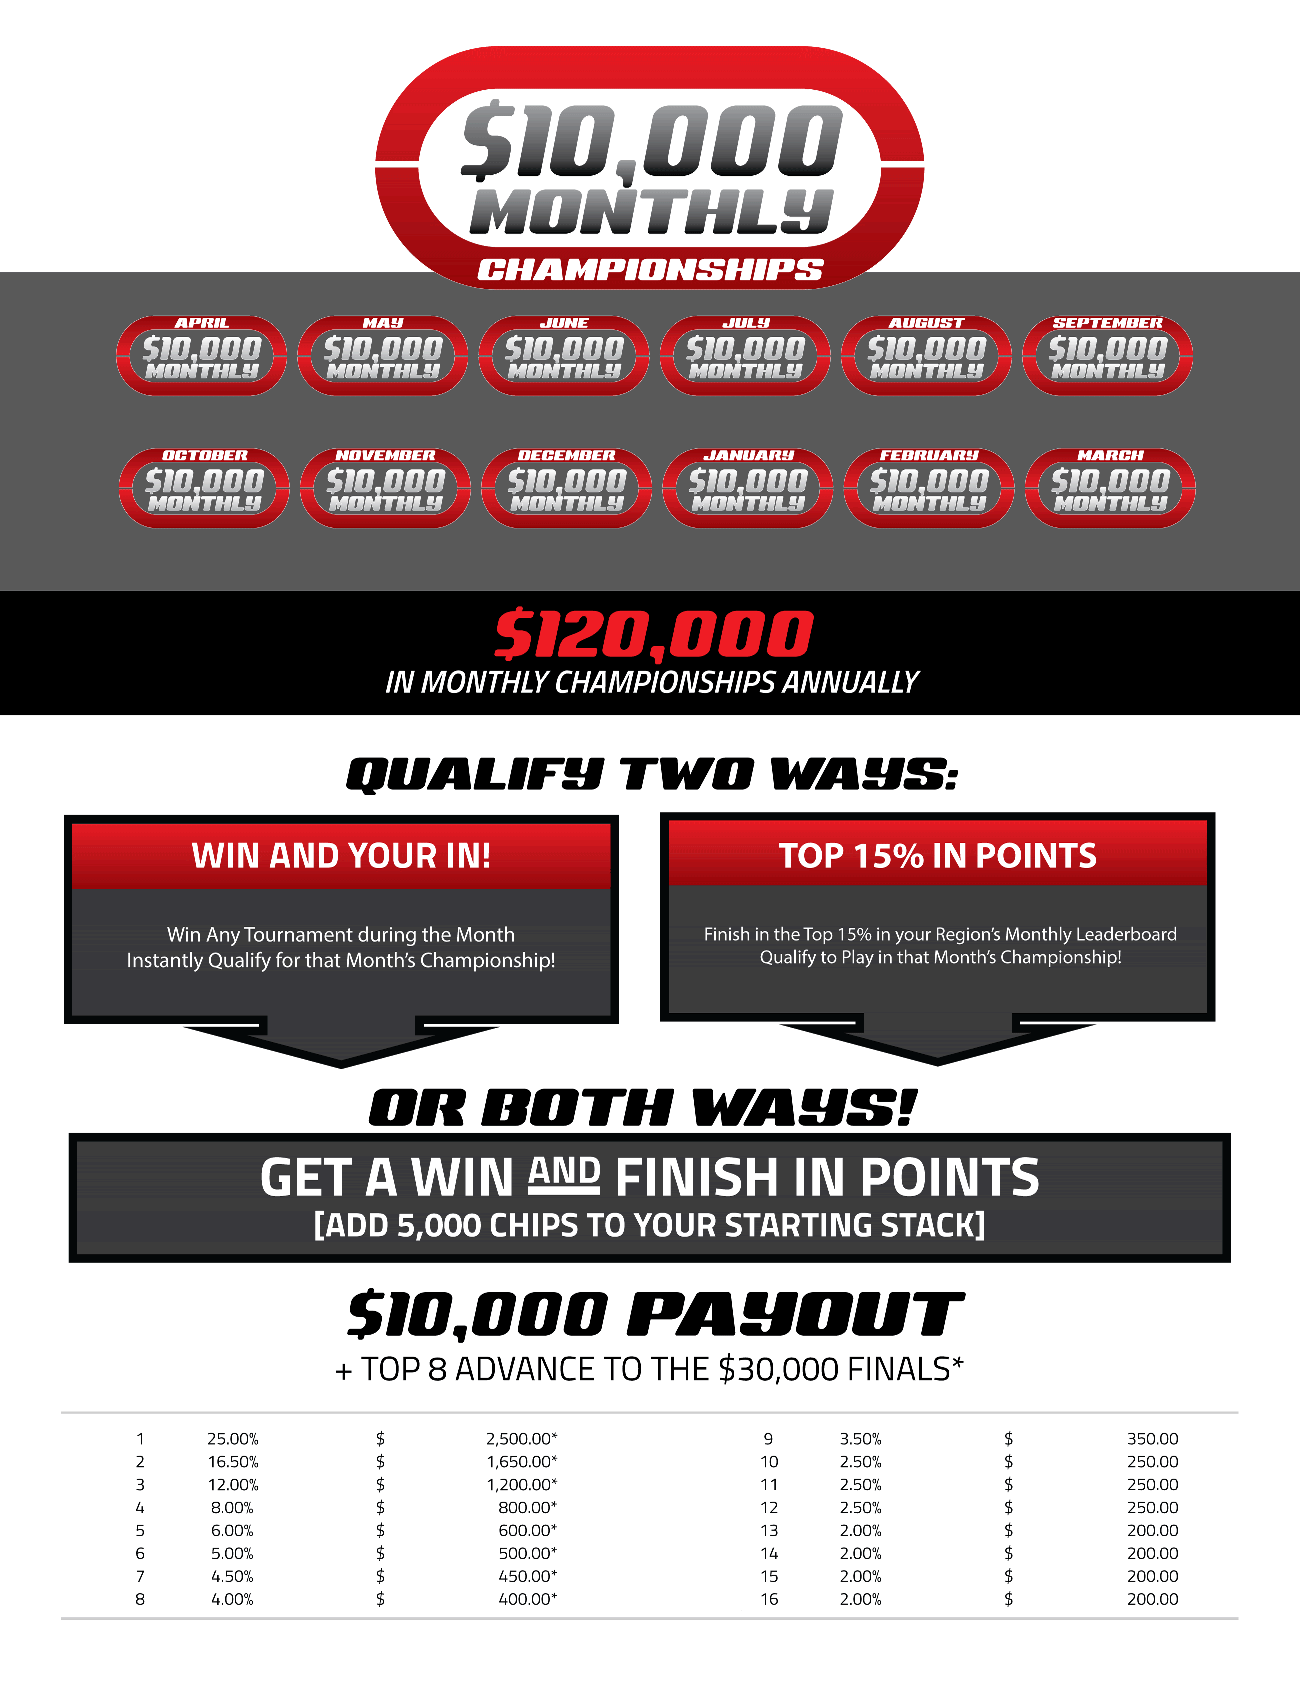 $10,000 Monthly Championship